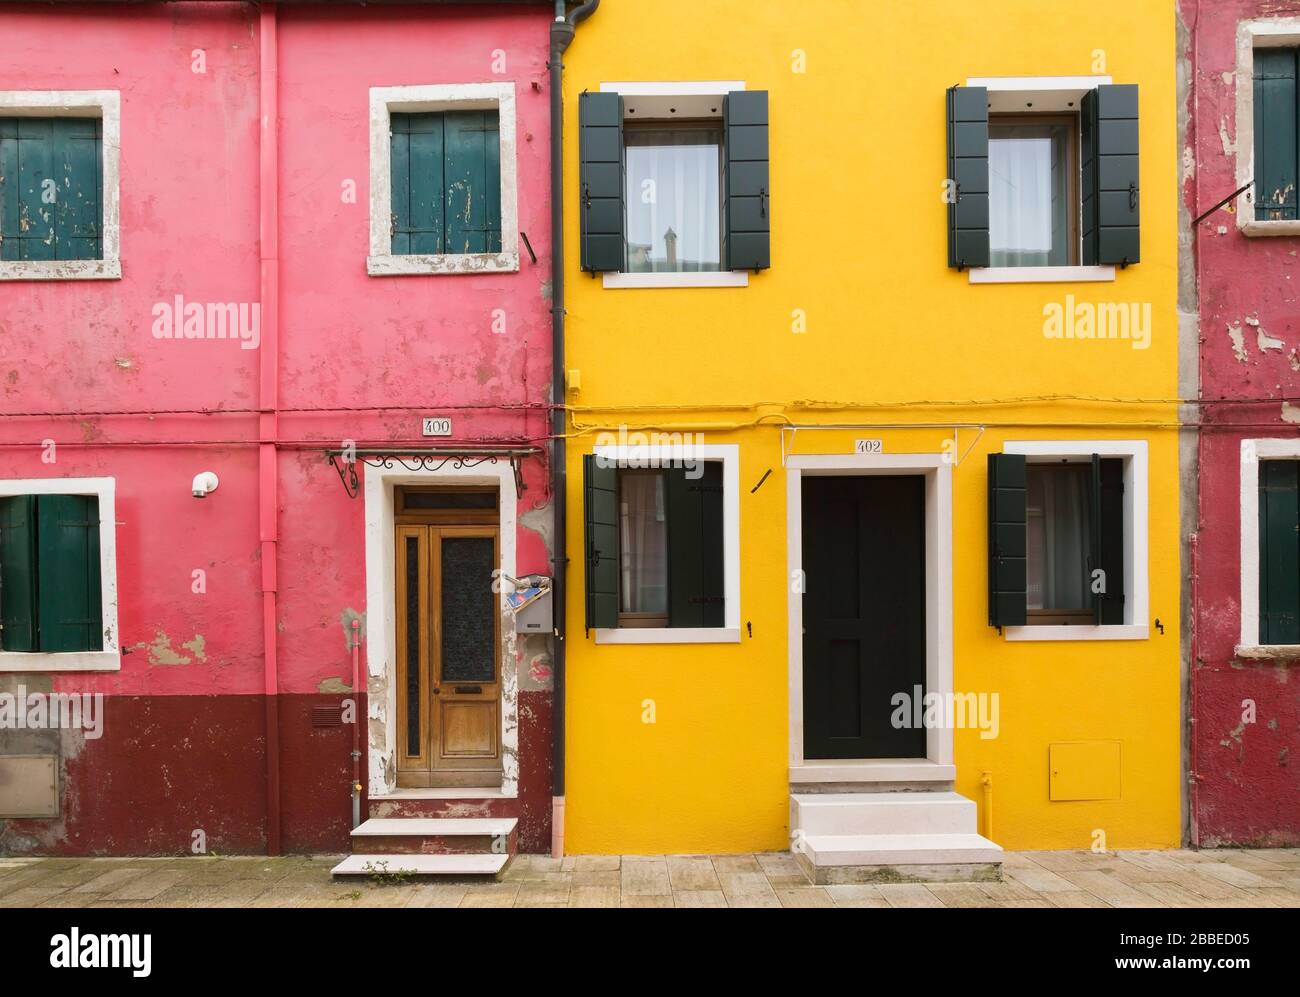 Pink and yellow stucco house facades with doorsteps and green wooden storm shutters on windows, Burano Island, Venetian Lagoon, Venice, Veneto, Italy Stock Photo